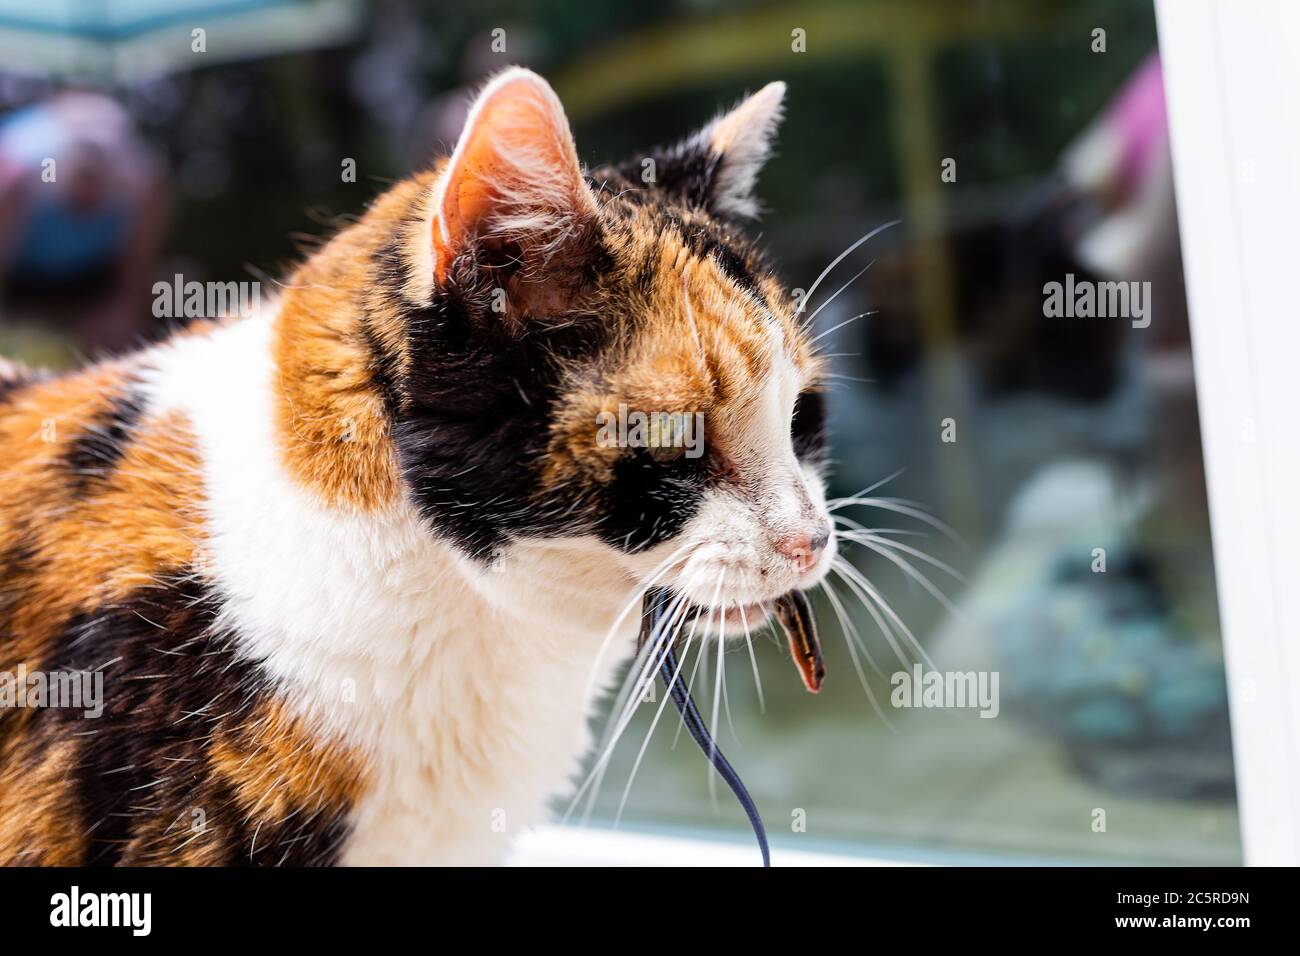 Calico cat outside hunter hunting catching blue lizard in mouth standing by door of home house asking to go inside Stock Photo